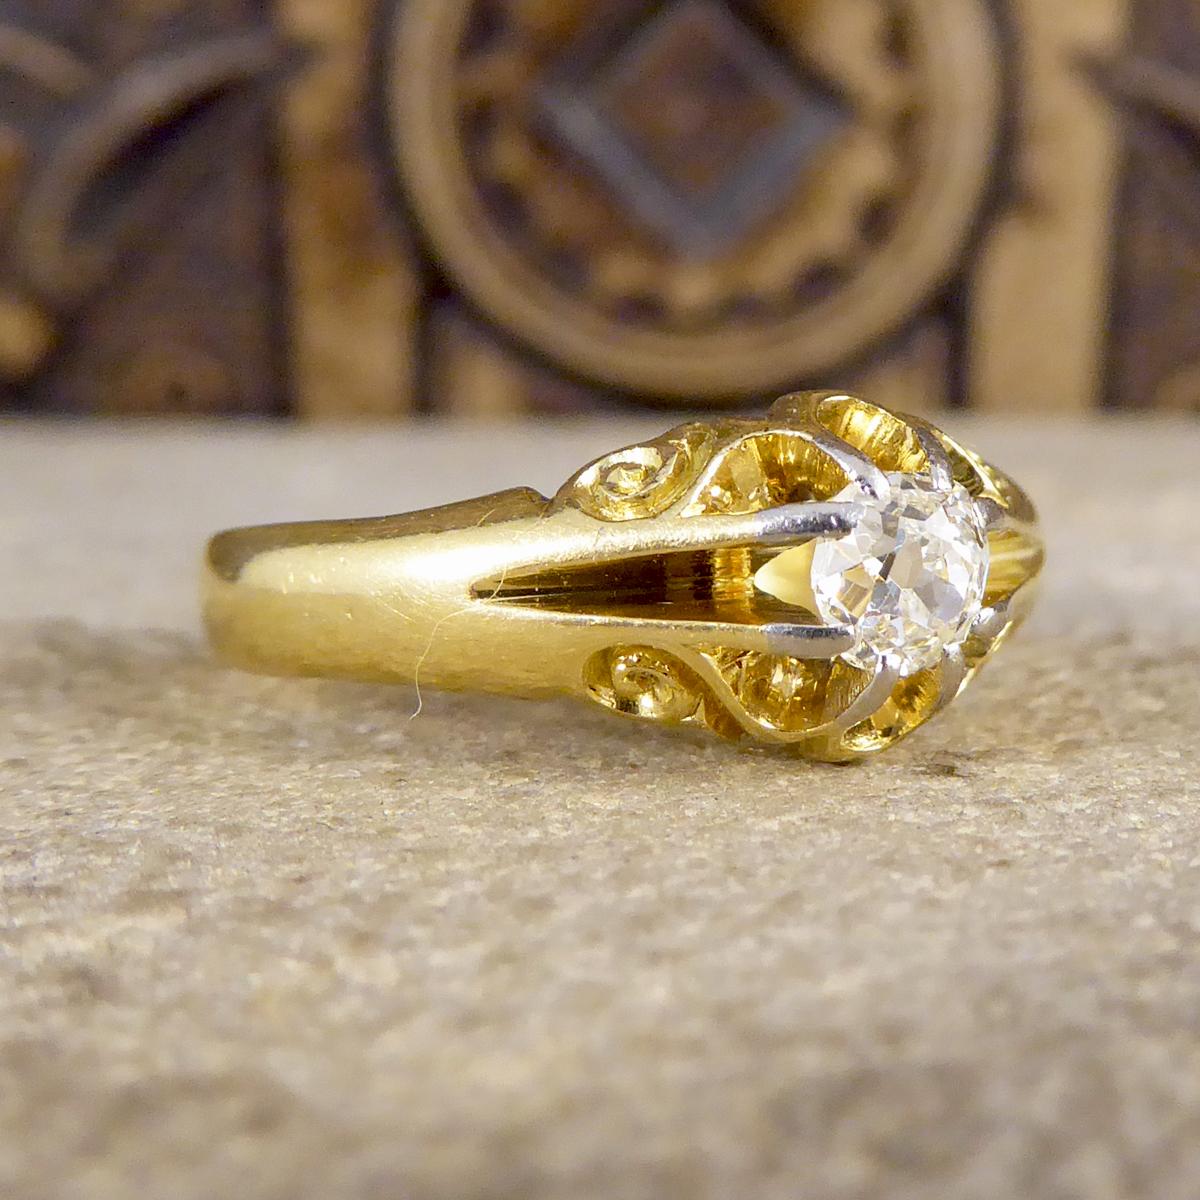 Such a beautiful ring which has been hand crafted in the Victorian era with detailed shoulders in 18ct Yellow Gold. This ring has been set with a 0.40ct Diamond in the centre with an open claw setting.

Diamond Details:
Cut: Old European Cut
Carat: